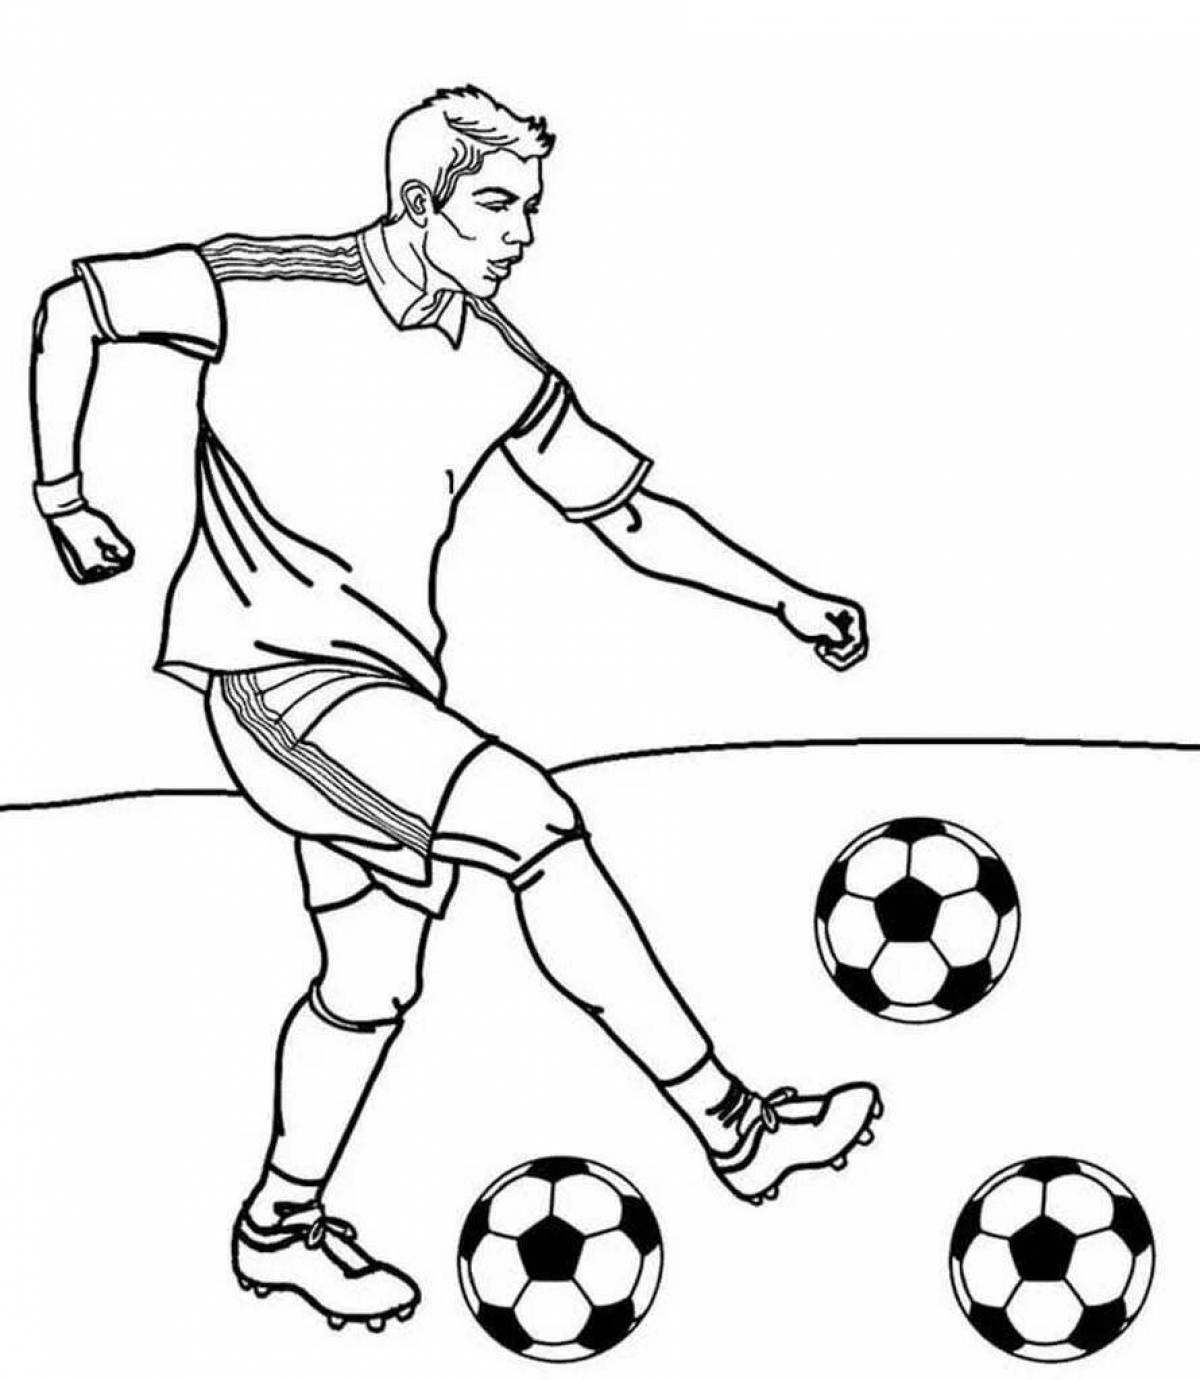 Joyful soccer player coloring pages for kids